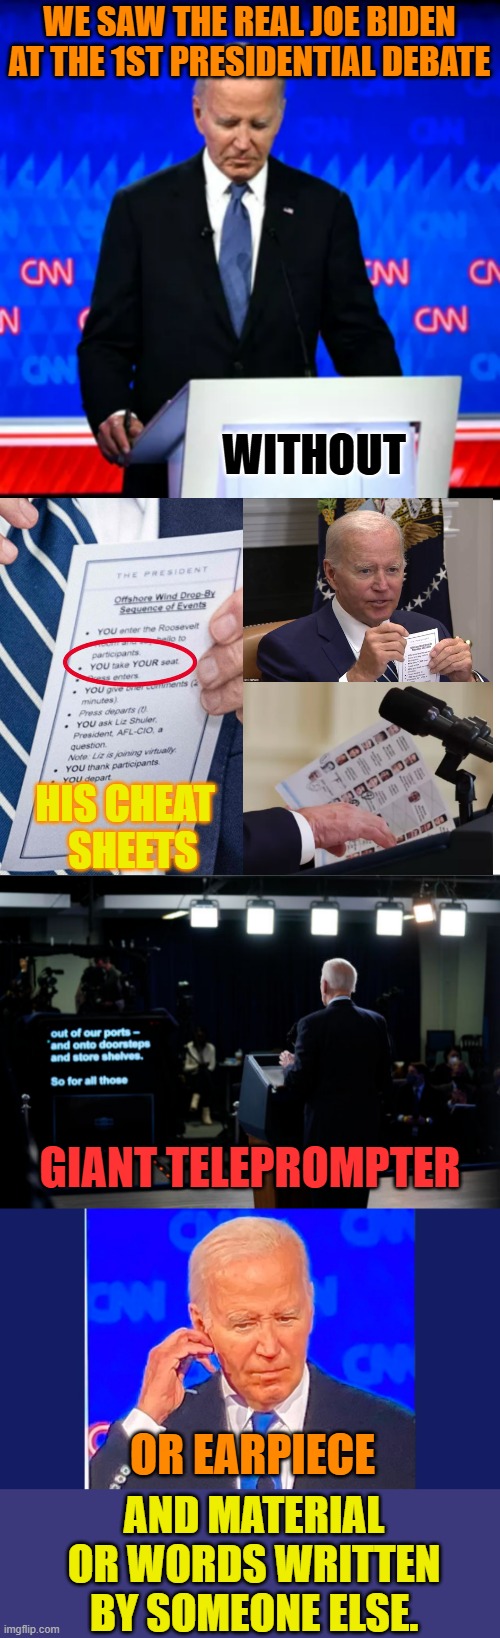 Something To Think About... | WE SAW THE REAL JOE BIDEN AT THE 1ST PRESIDENTIAL DEBATE; WITHOUT; HIS CHEAT   SHEETS; GIANT TELEPROMPTER; OR EARPIECE; AND MATERIAL OR WORDS WRITTEN BY SOMEONE ELSE. | image tagged in memes,politics,joe biden,no,help,think about it | made w/ Imgflip meme maker